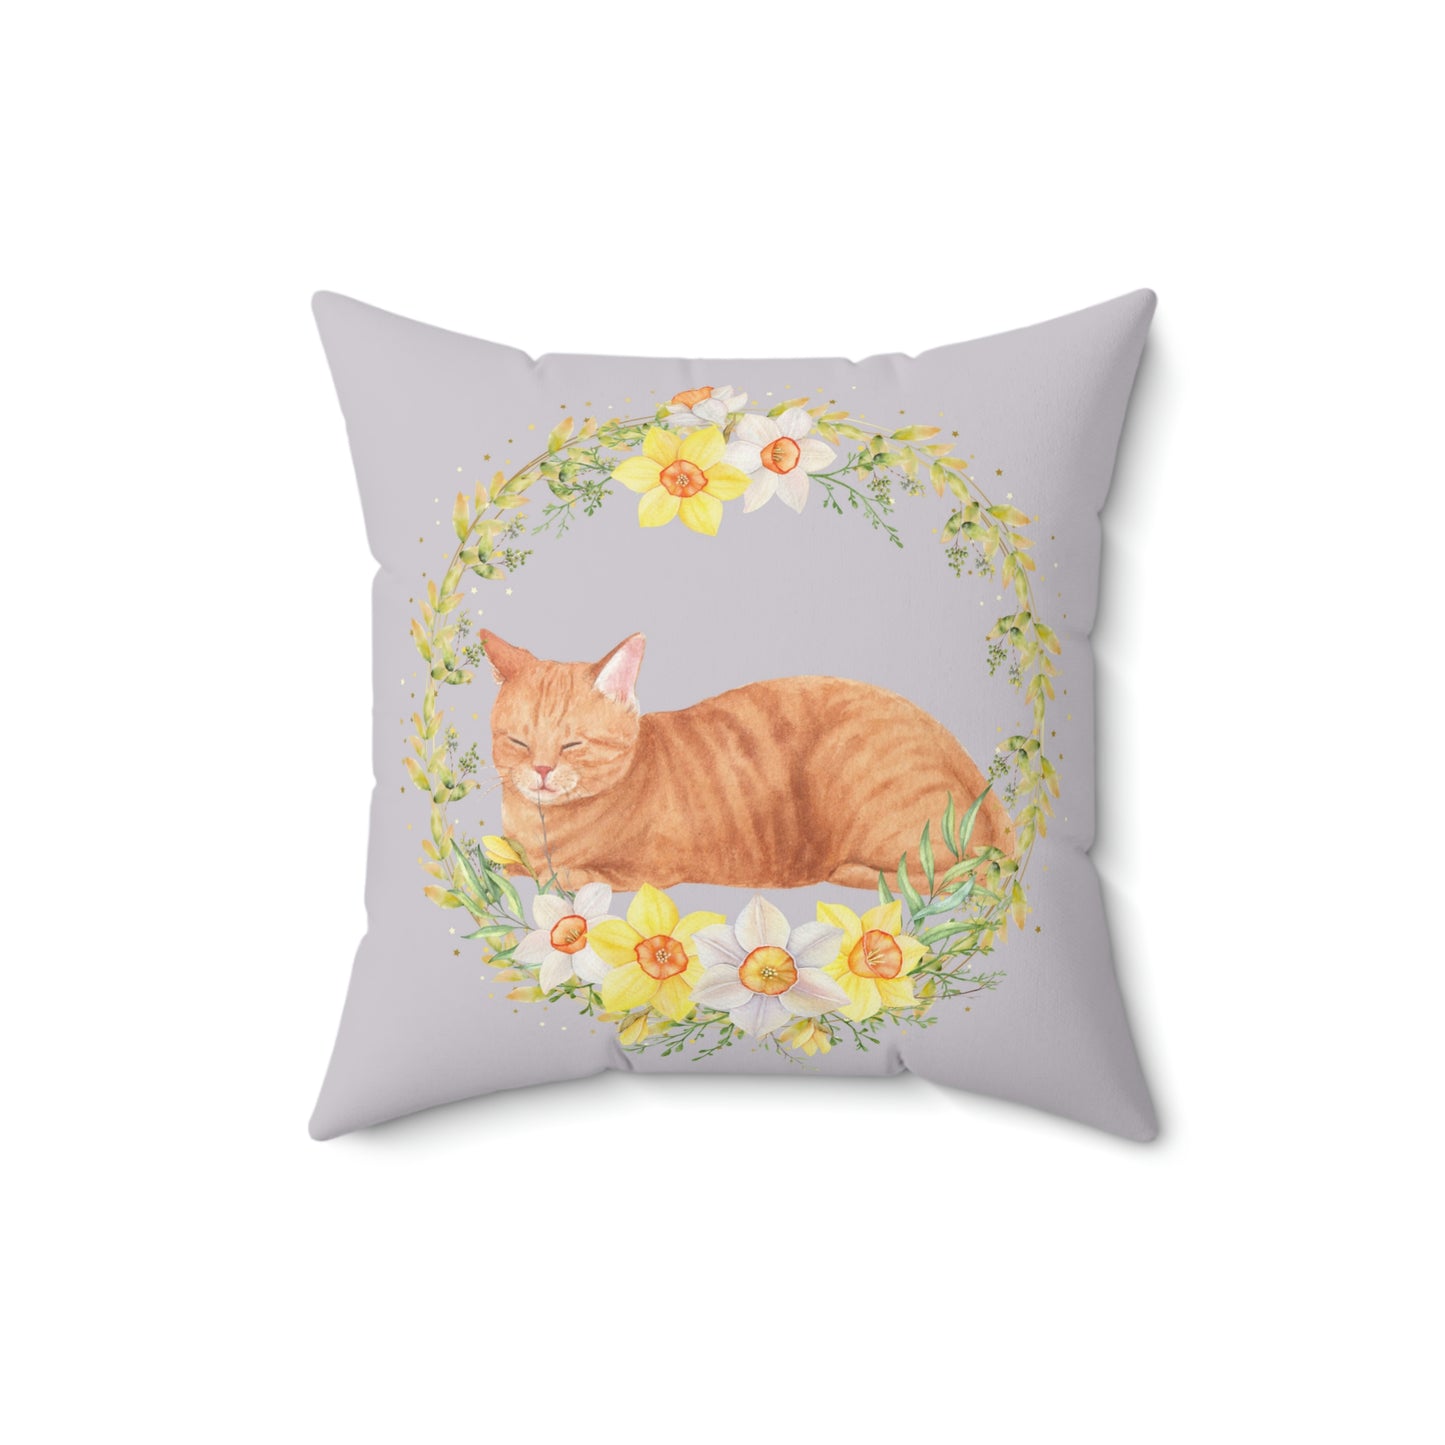 Sleeping Cat/Kitten with Floral Wreath design Spun Polyester Square Indoor Pillow